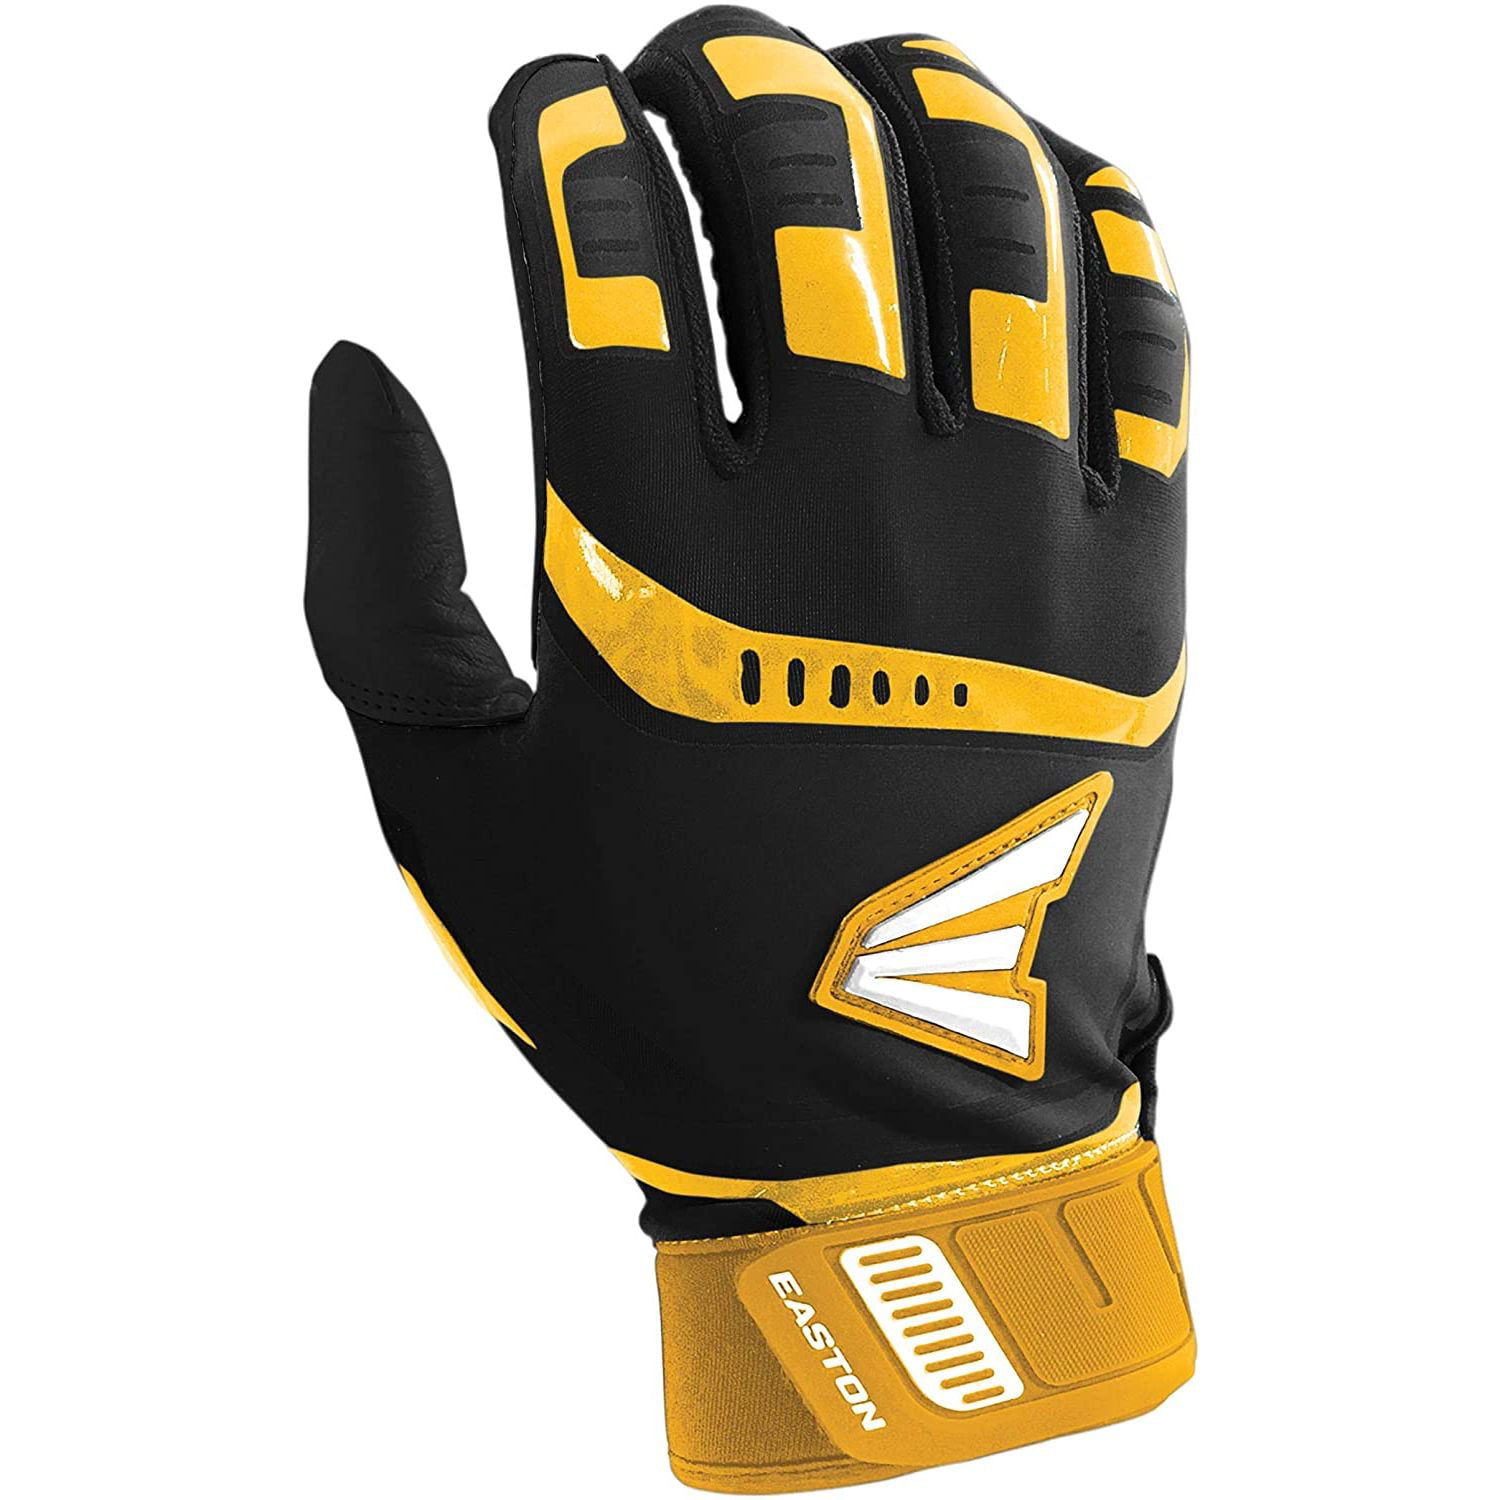 2021 EASTON WALK-OFF Batting Glove Series Pair Adult and Youth 